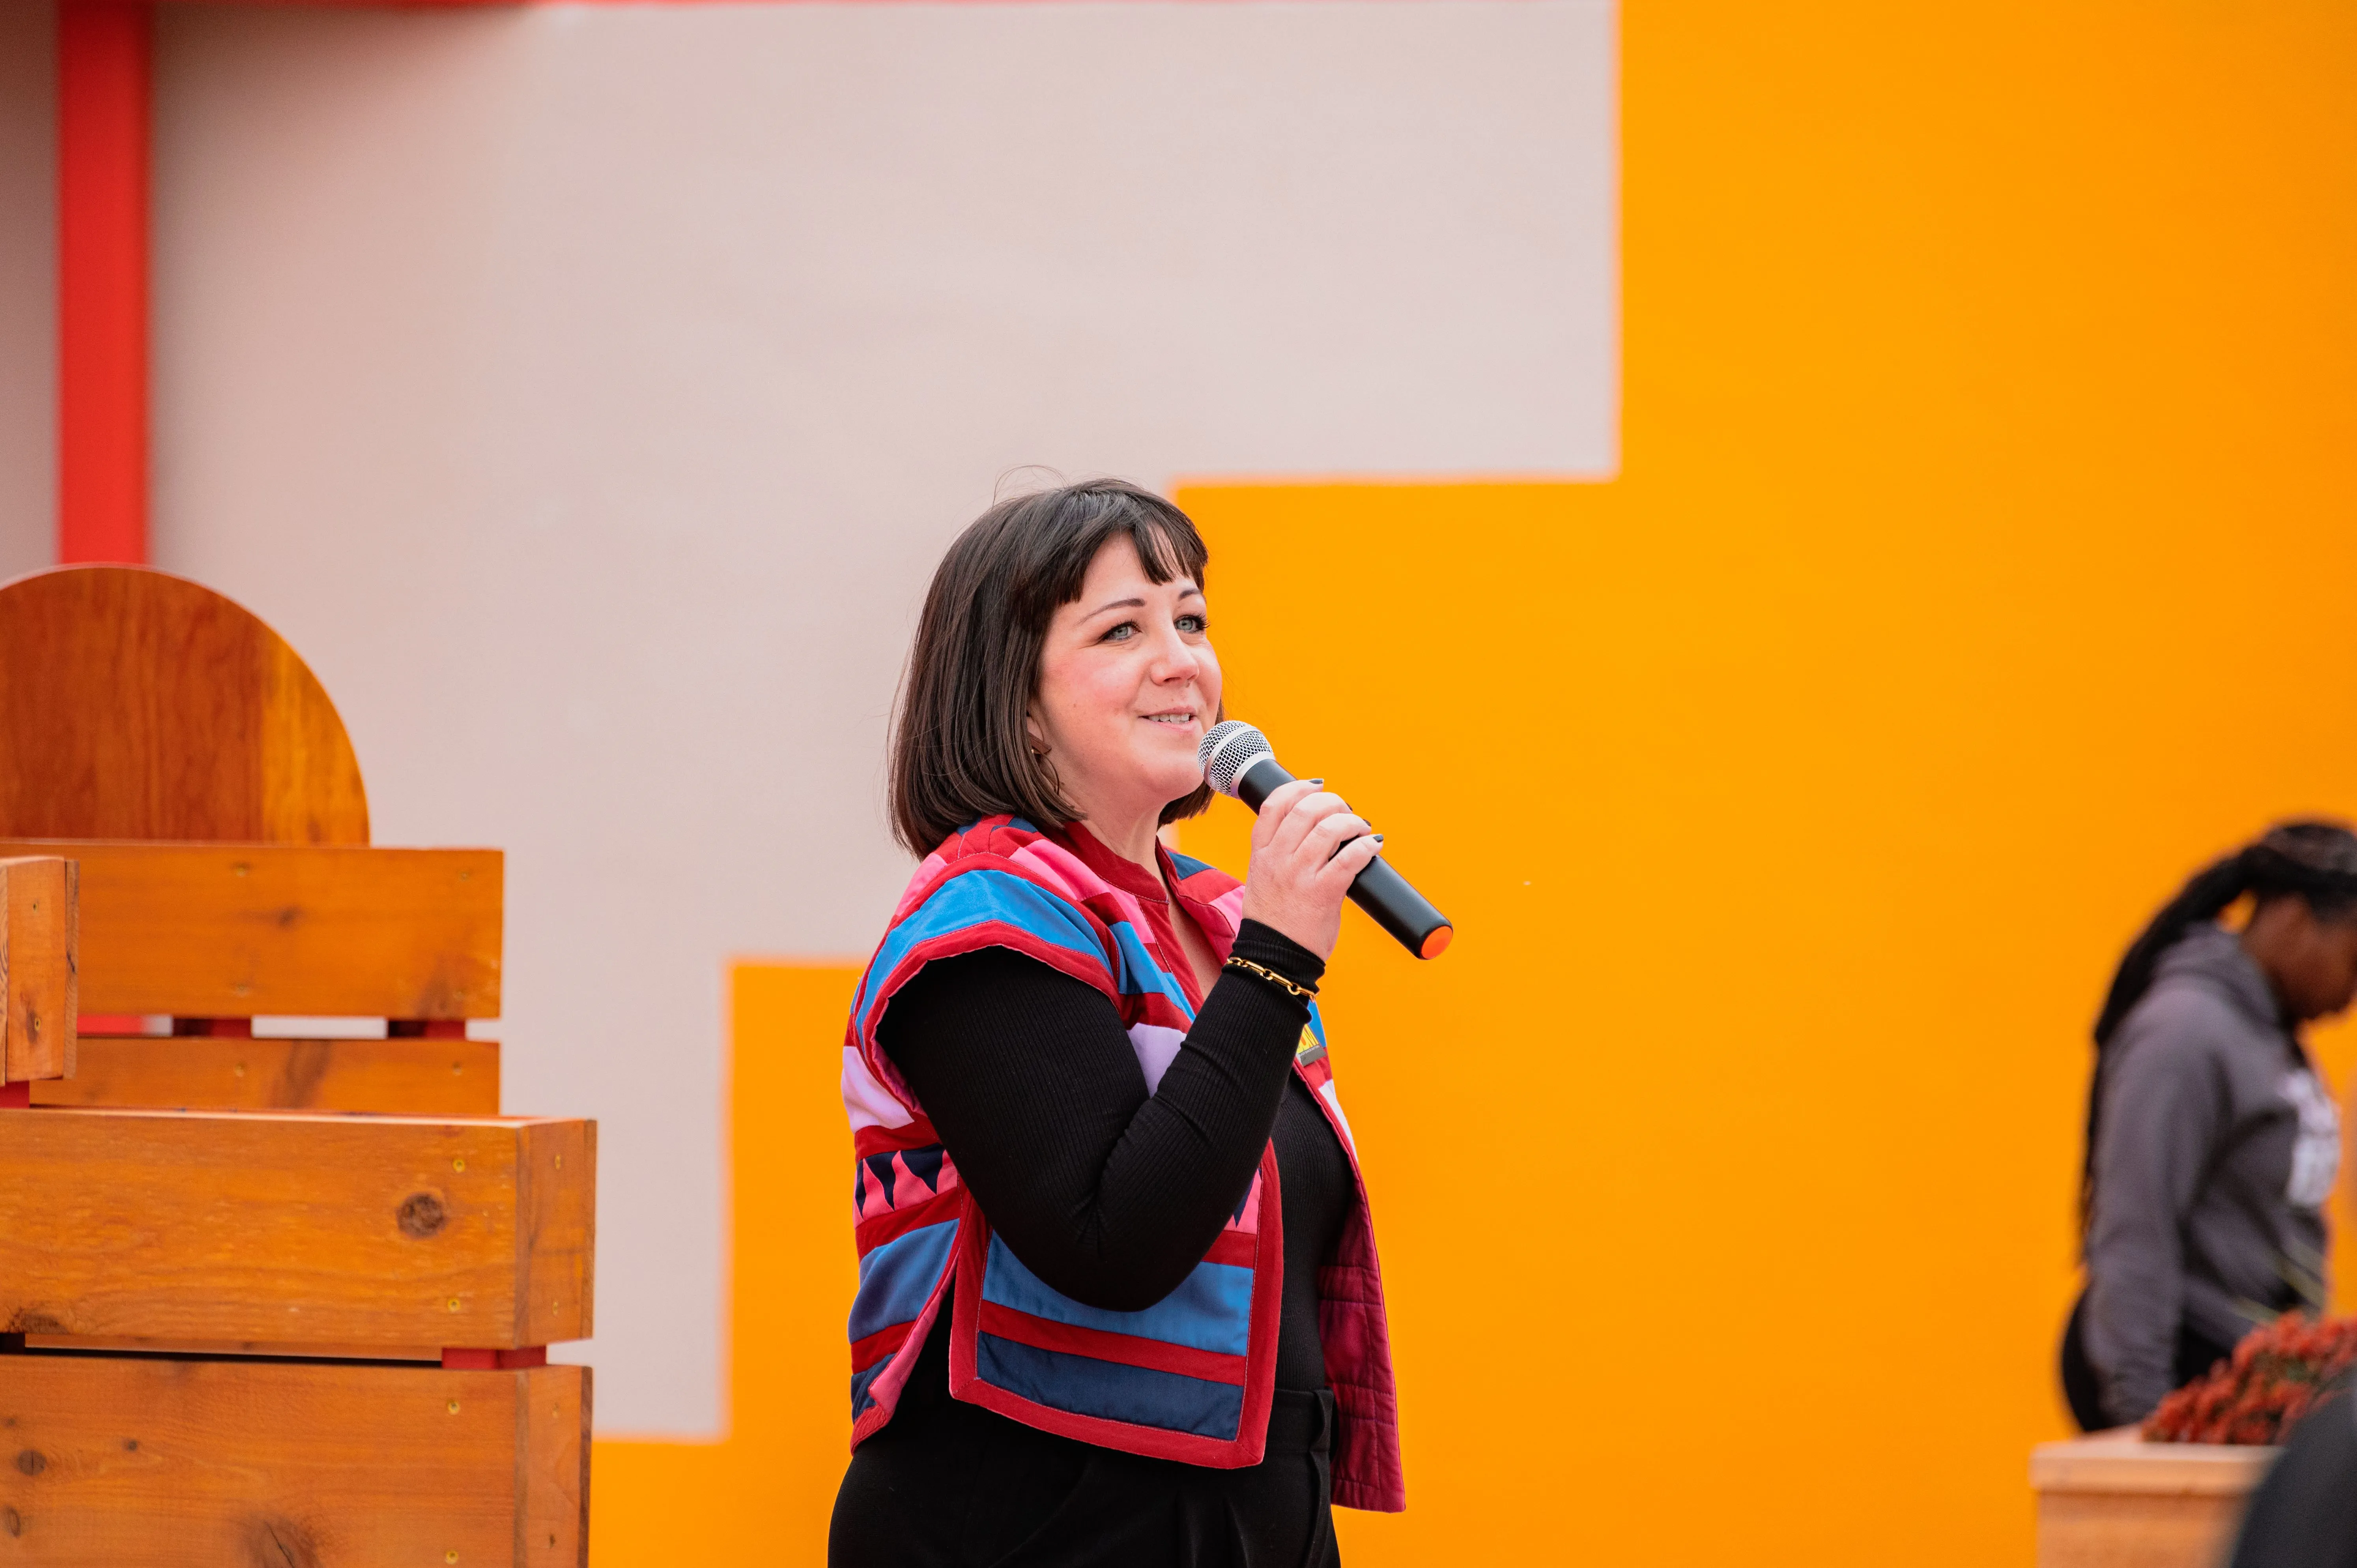 Woman speaking into a microphone at an event with an orange background.